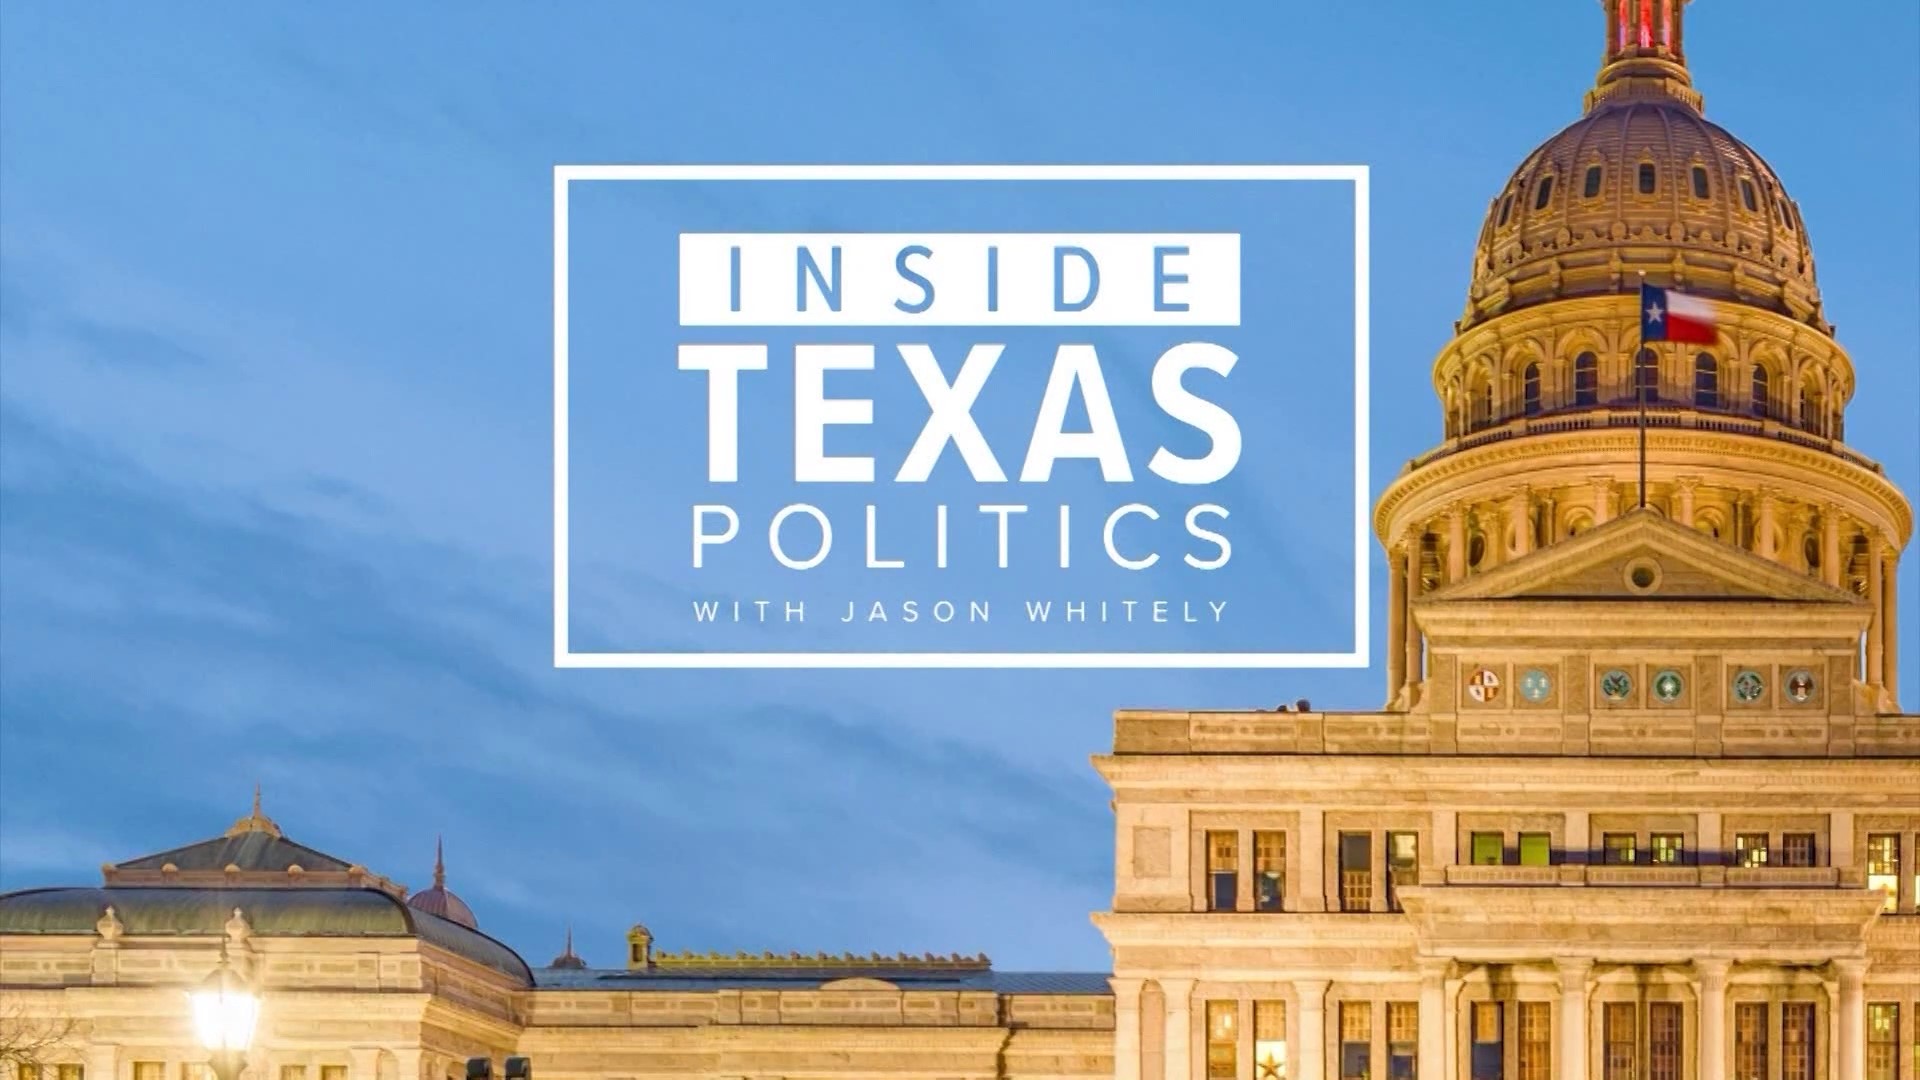 Attorneys representing Texas will return to court Wednesday to try to convince a 3-judge panel that Senate Bill 4 does not violate the Constitution.